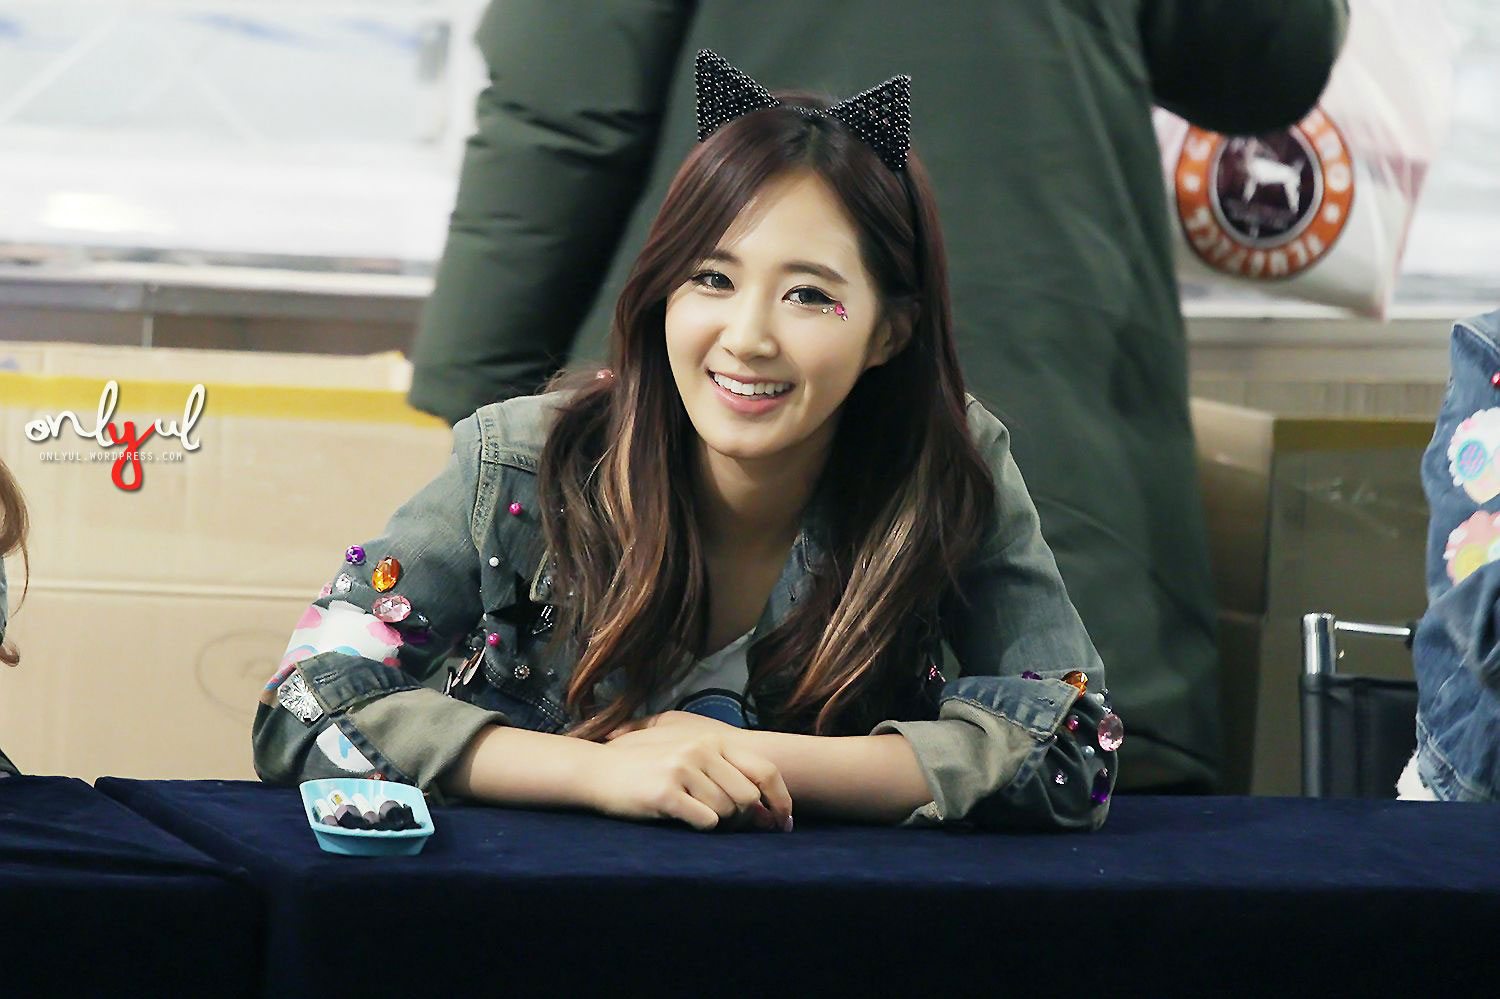 Snsd Yuri Times Square fan signing event